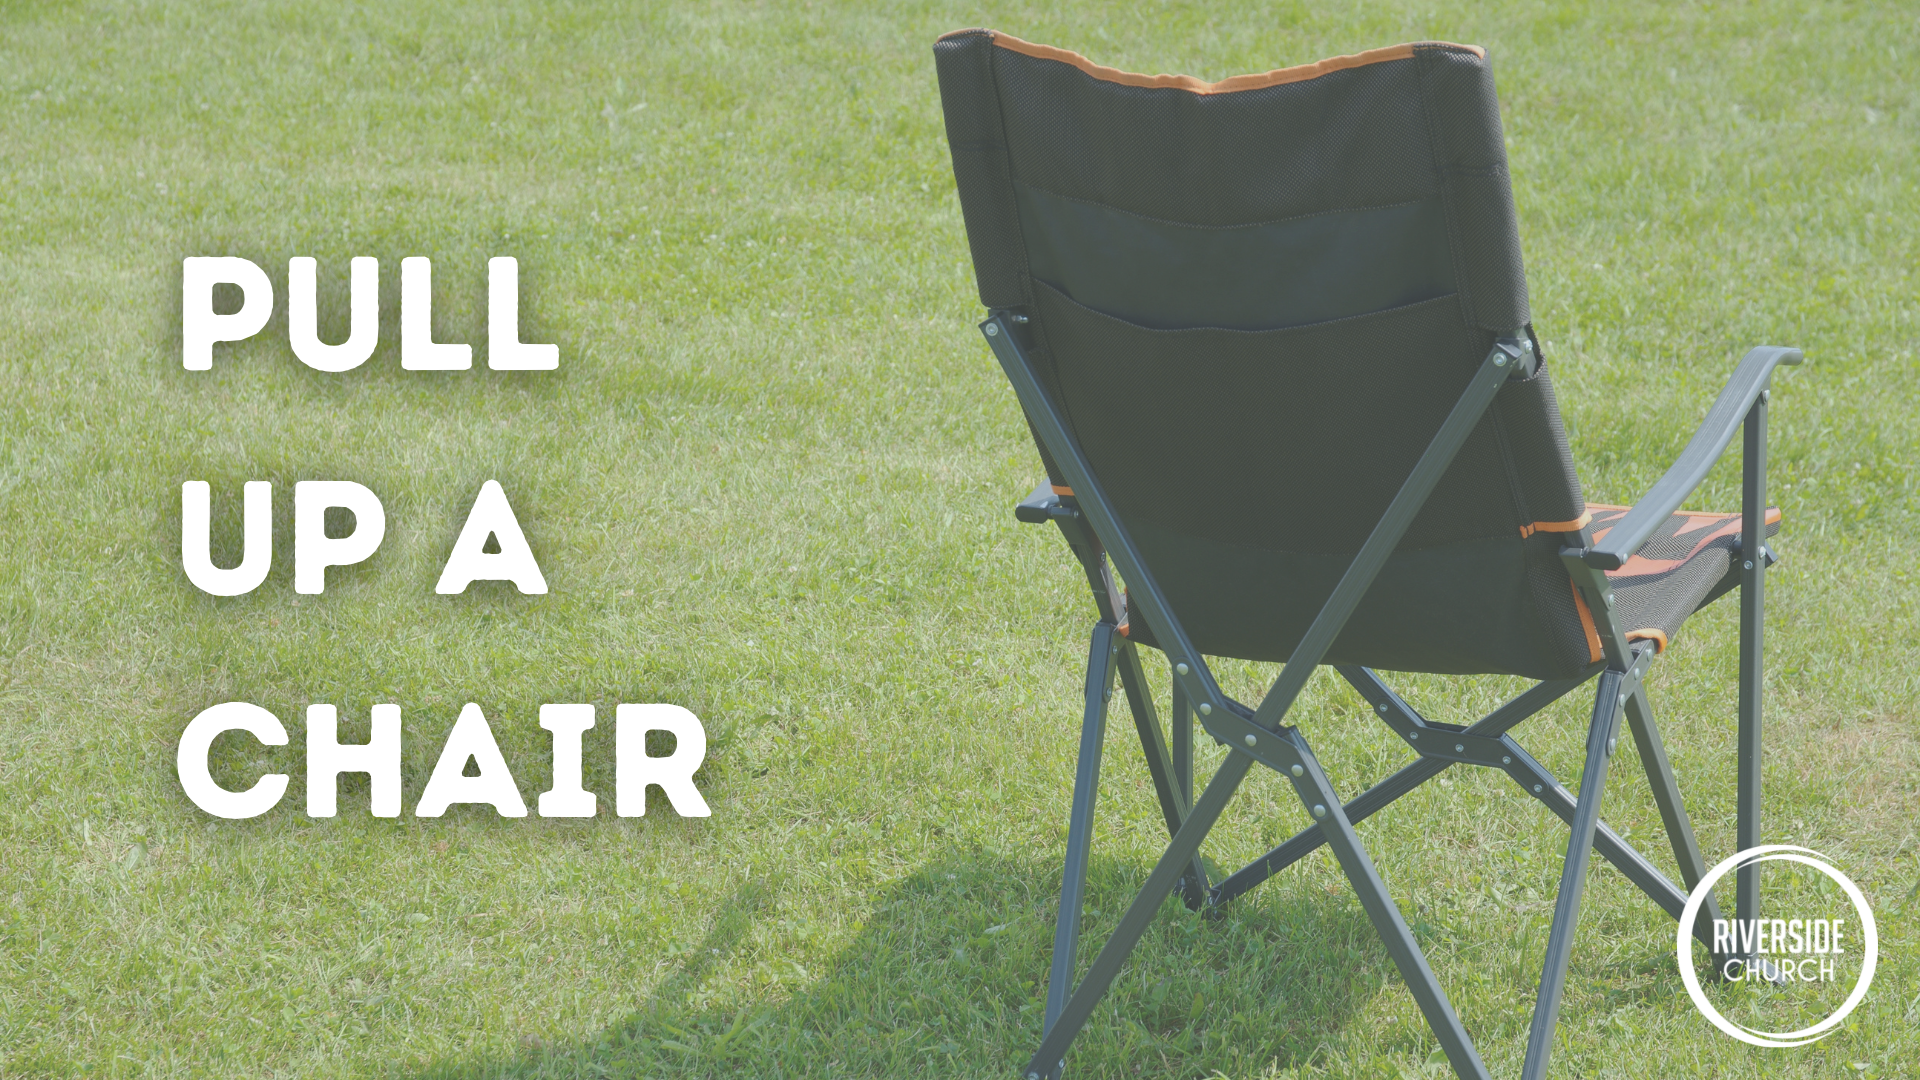 Pull Up A Chair banner